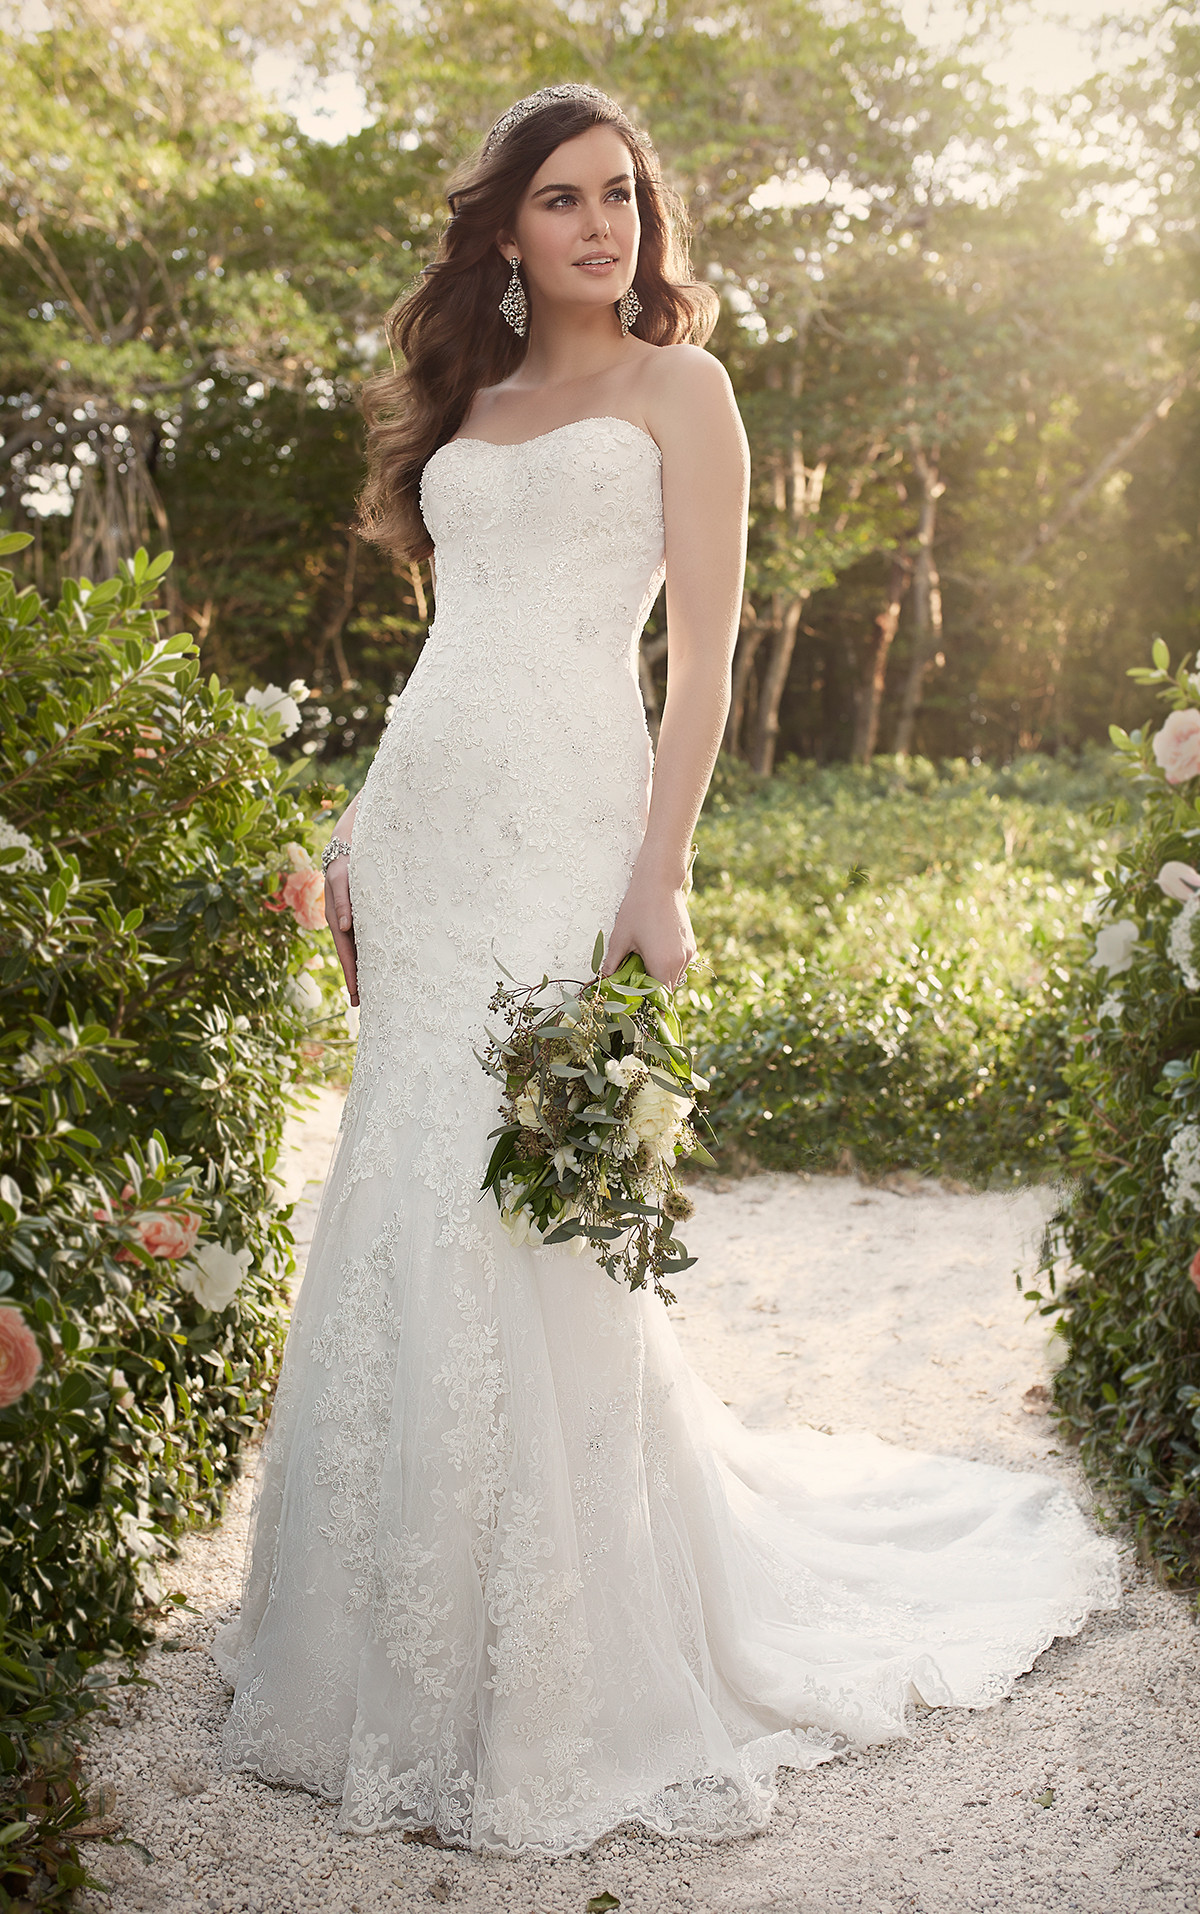 Strapless Wedding Gown
 Strapless Lace Wedding Dresses